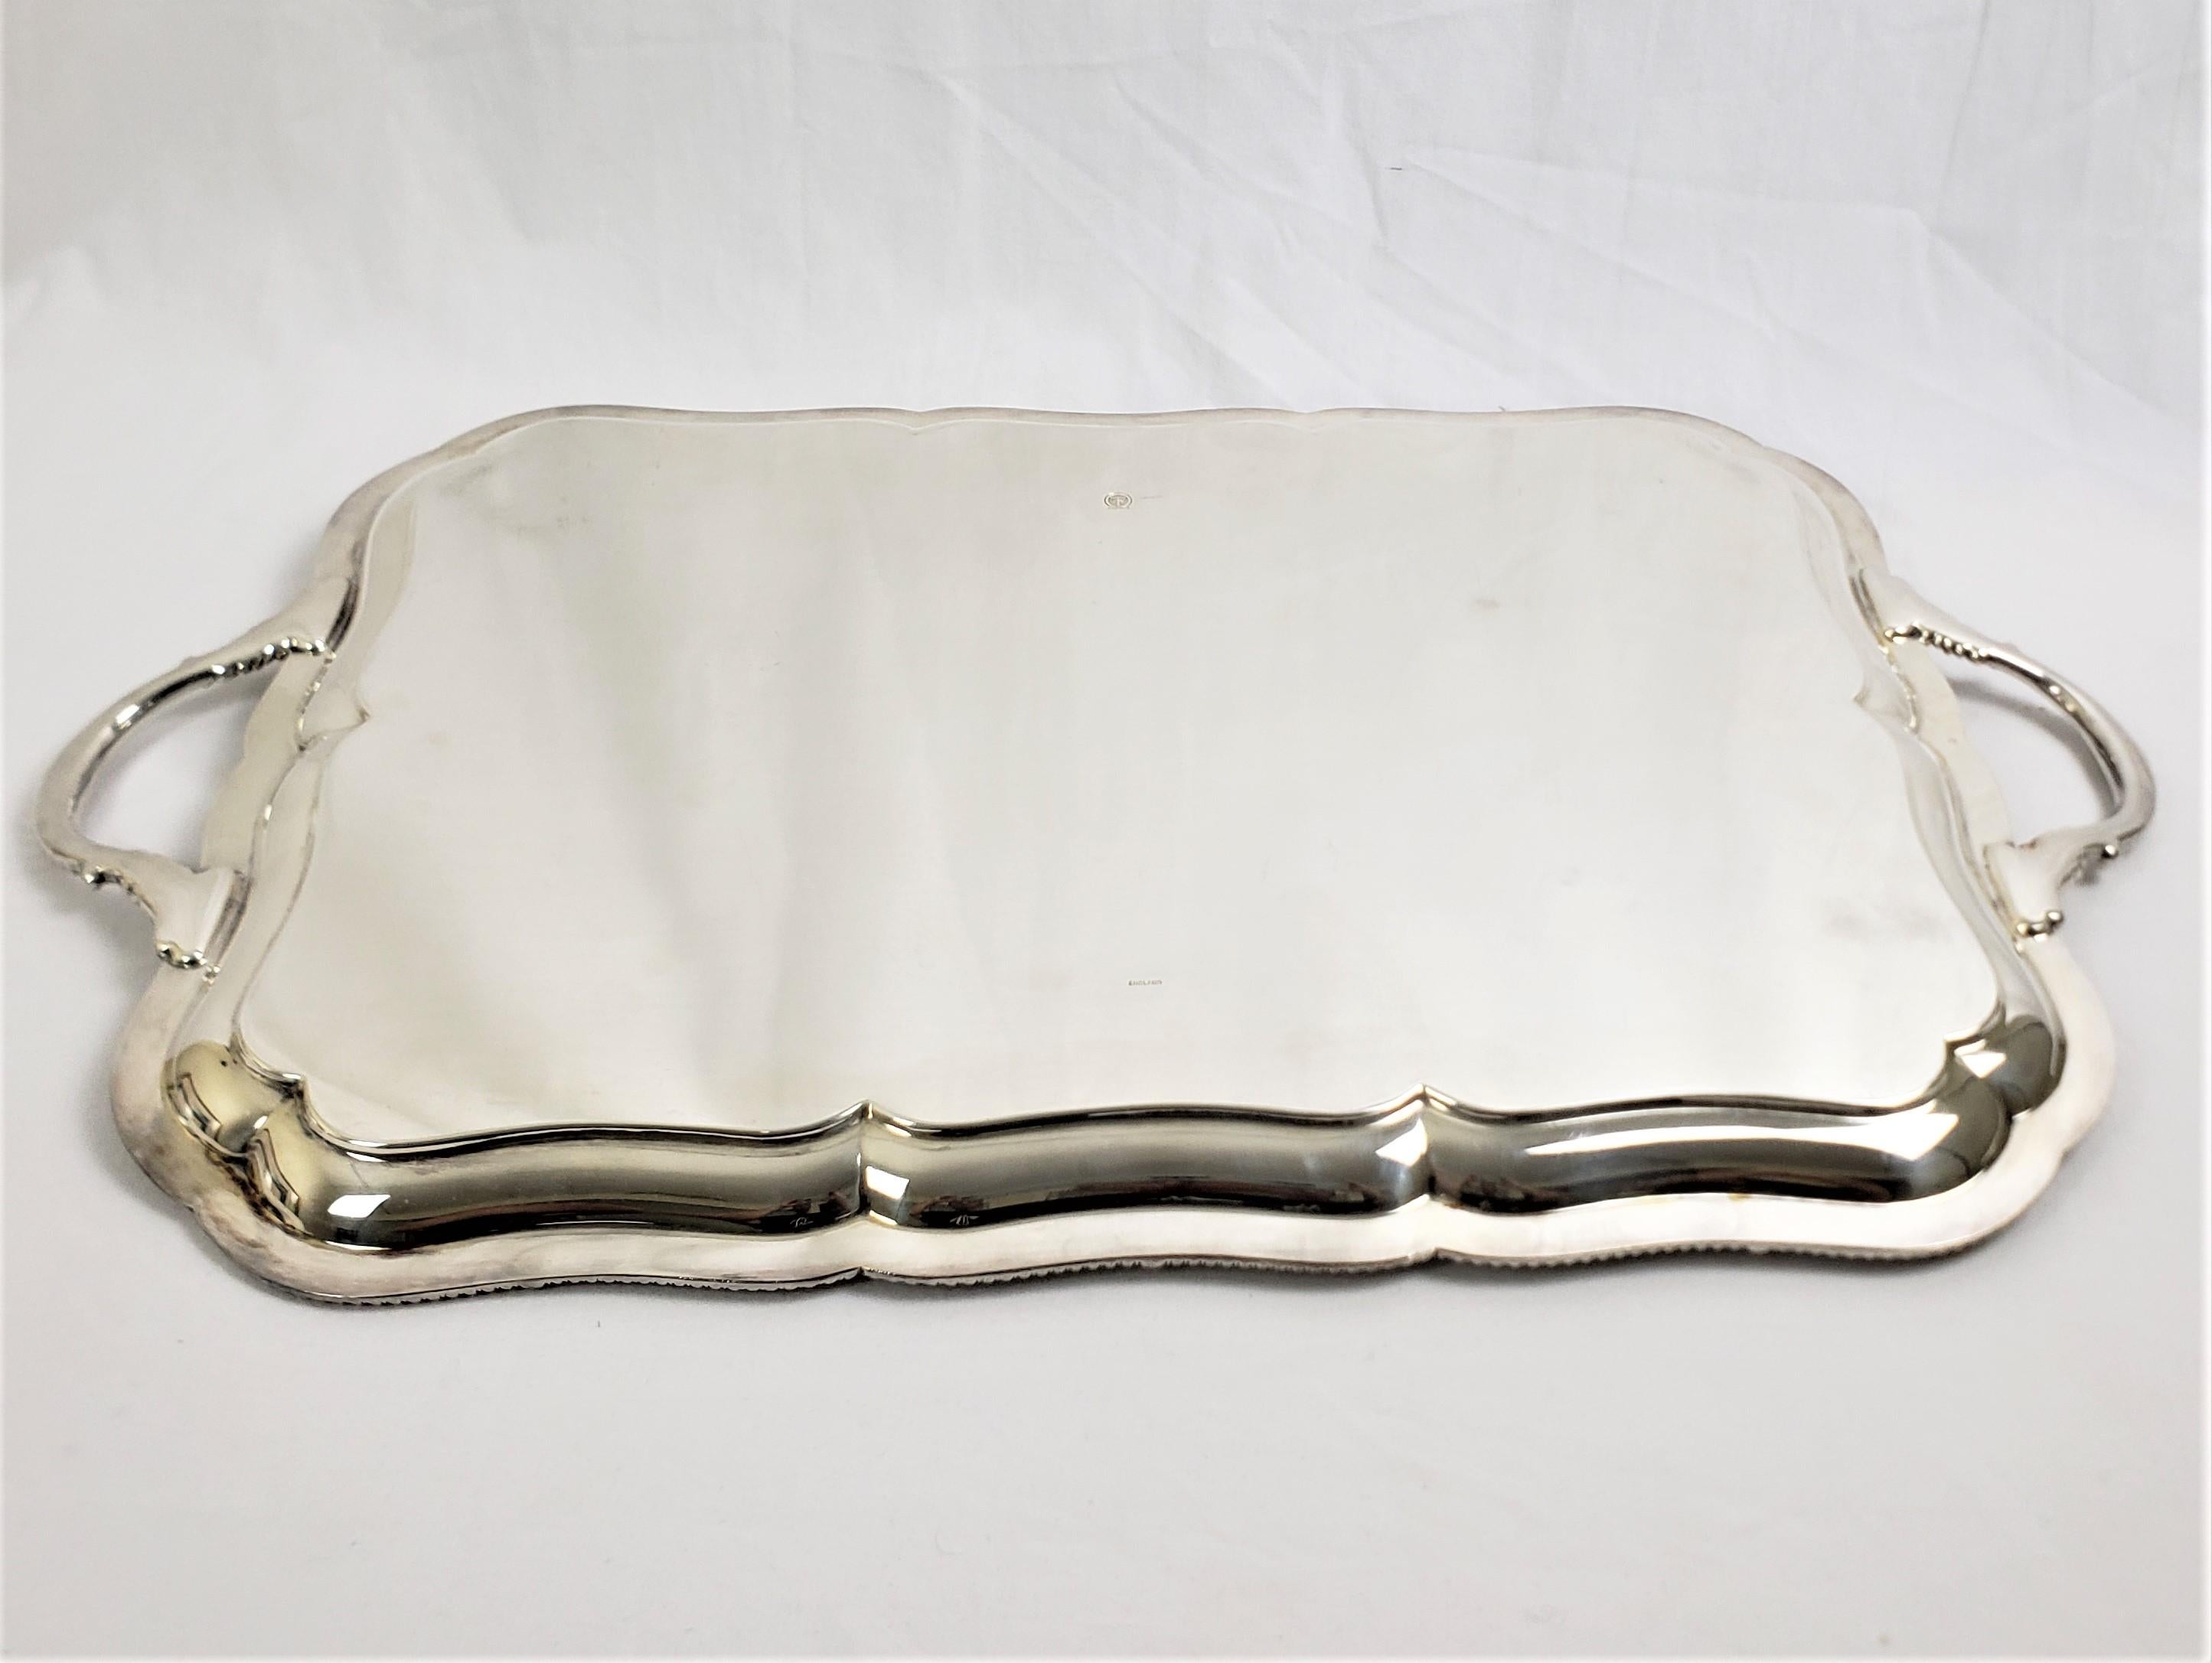 Antique Barker Ellis Silver Plated Serving Tray with Stylized Rope Decoration In Good Condition For Sale In Hamilton, Ontario